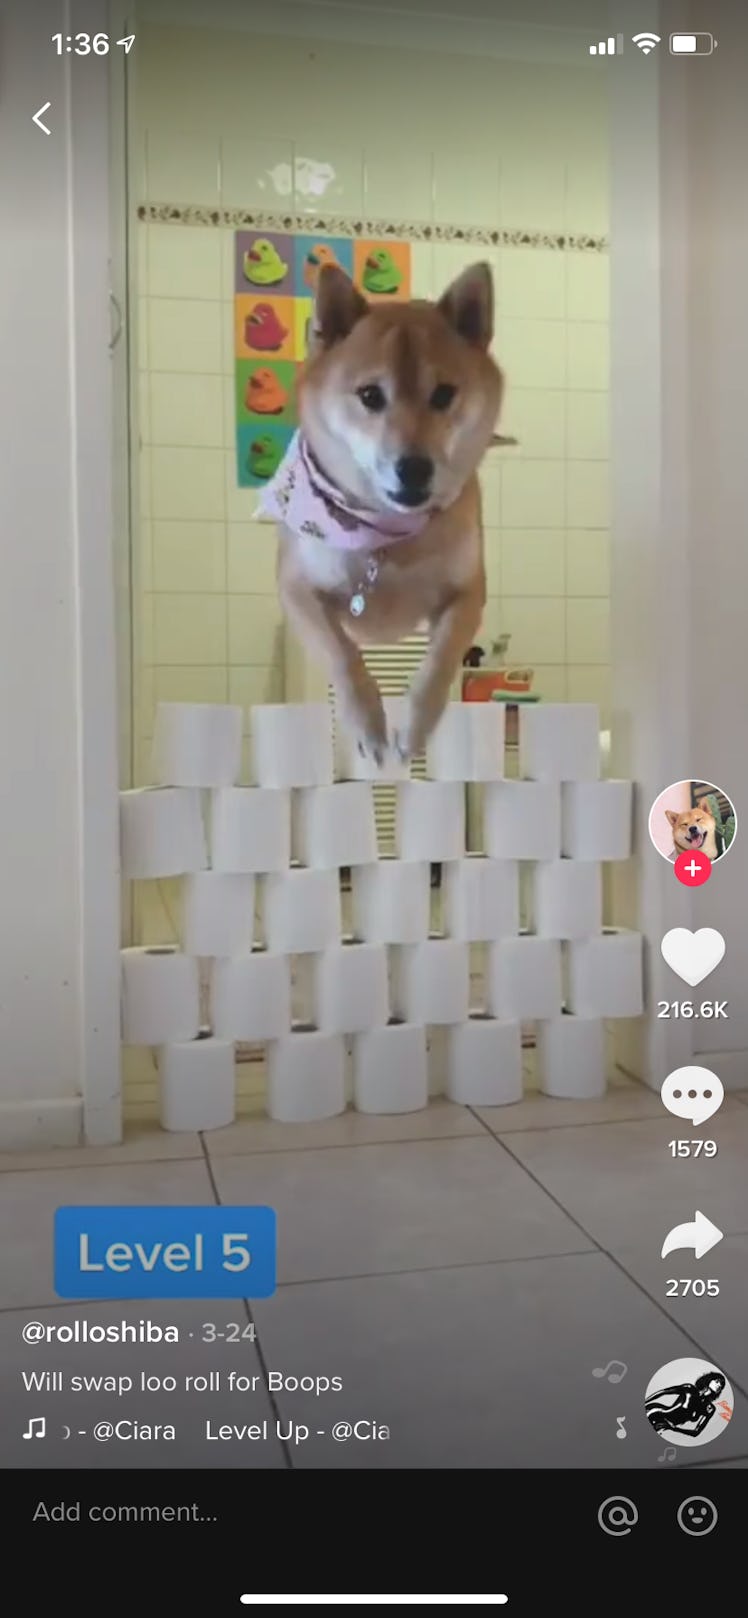 A dog leaps over a stack of toilet paper rolls for a TikTok challenge.